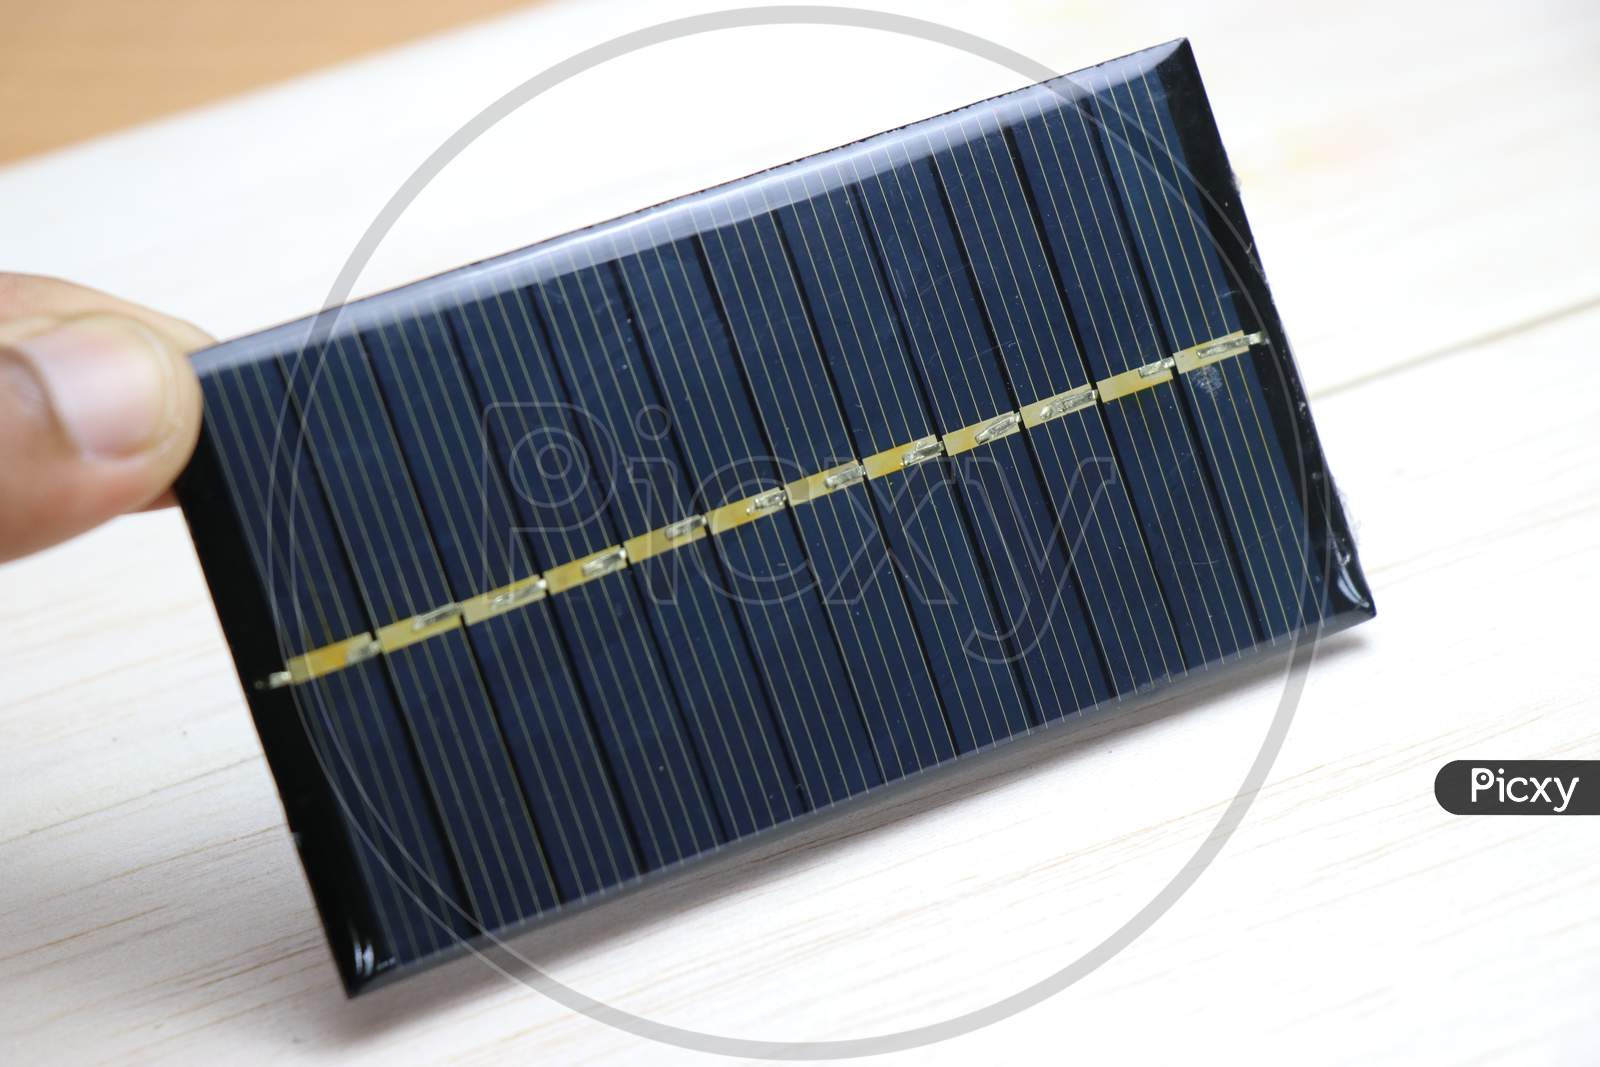 Mini Solar Cell Which Can Be Used For Small Solar Lamps,Mini Solar Cars,Solar Mobile Battery Chargers And Many More Applications